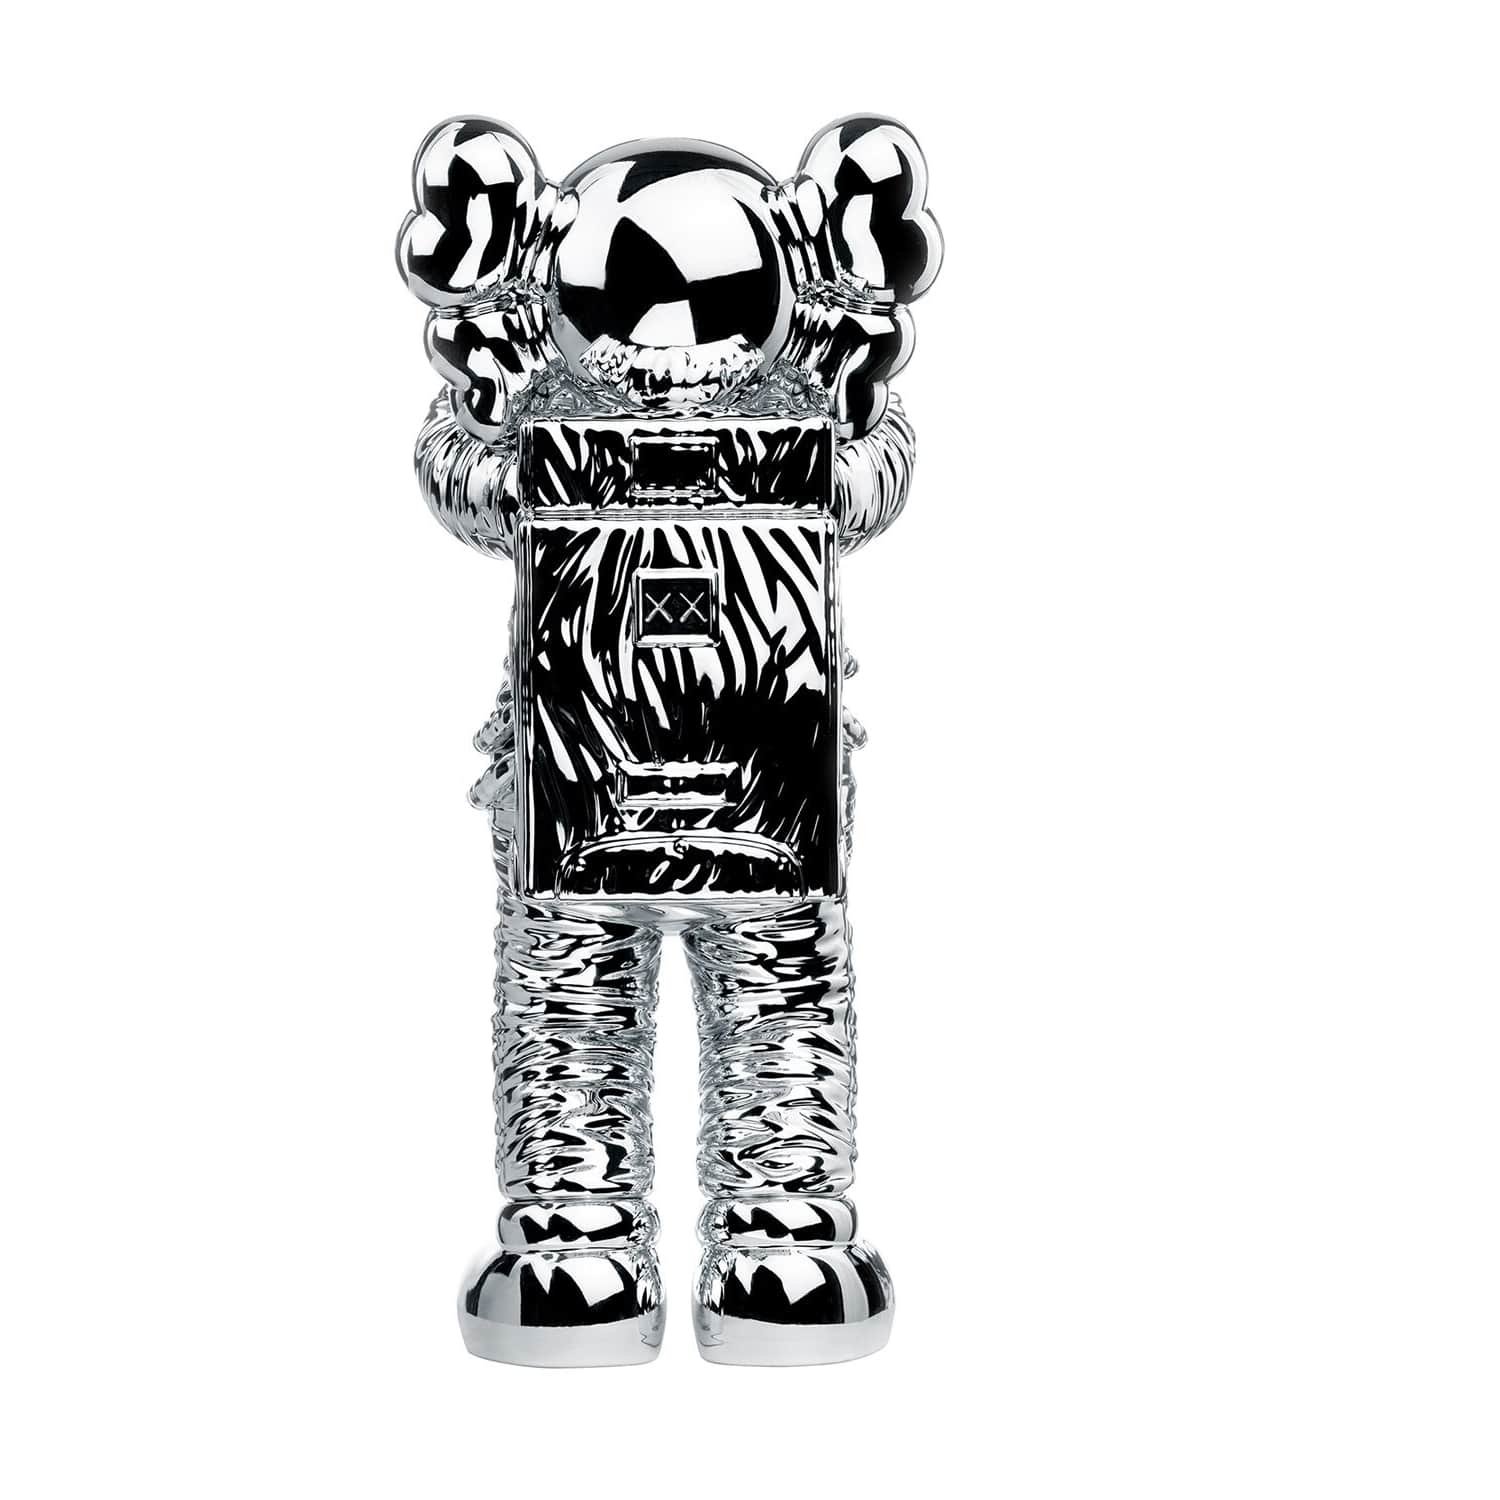 Holiday Space Silver by Kaws from 2020 - Dope! Gallery